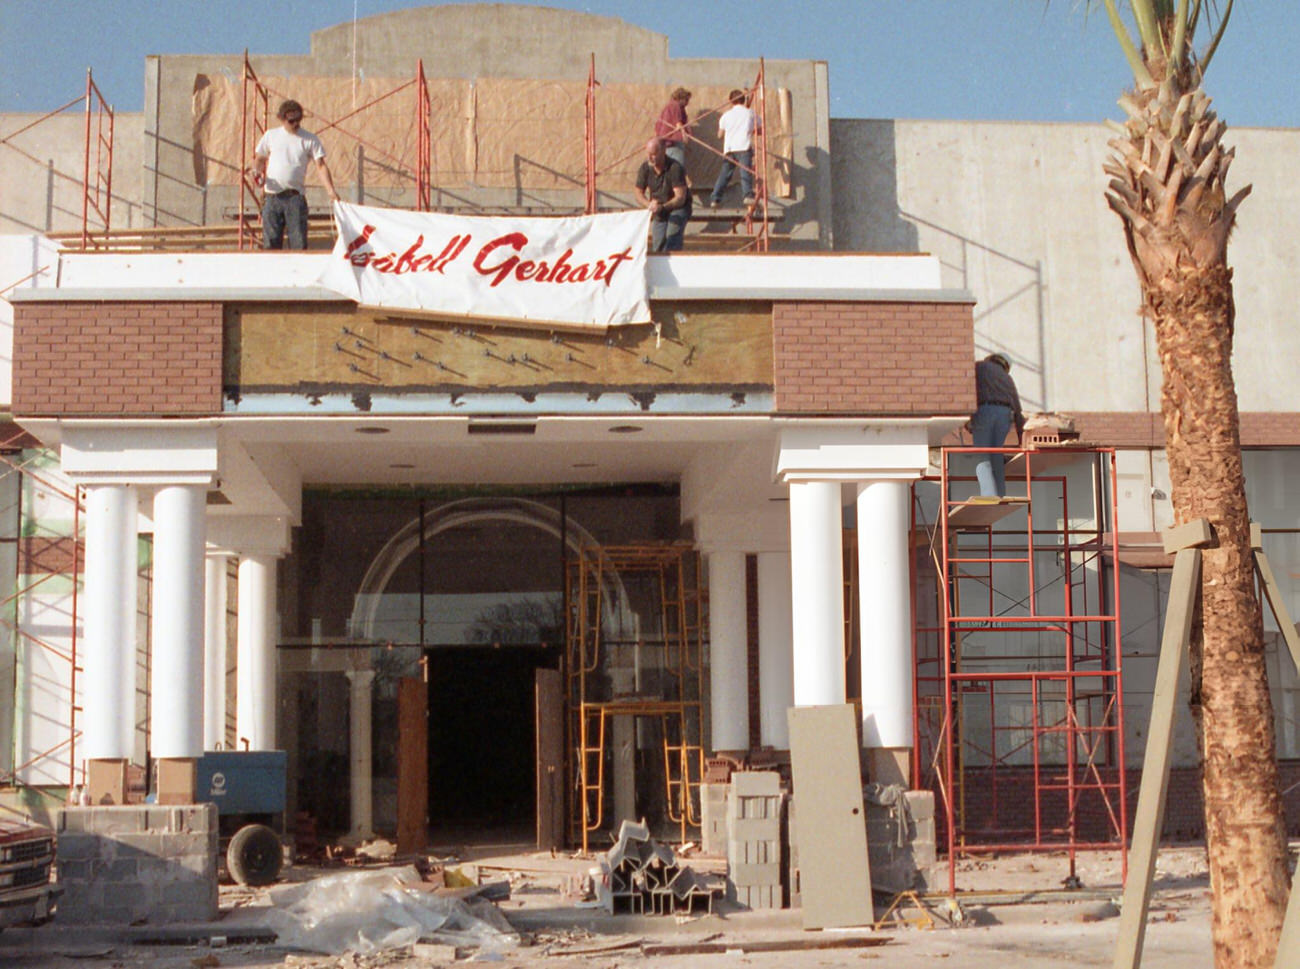 Workers install a banner at the Isabell Gerhart store in River Oaks Plaza, marking the upscale clothier's relocation from the Galleria, Houston, Texas, 1991.